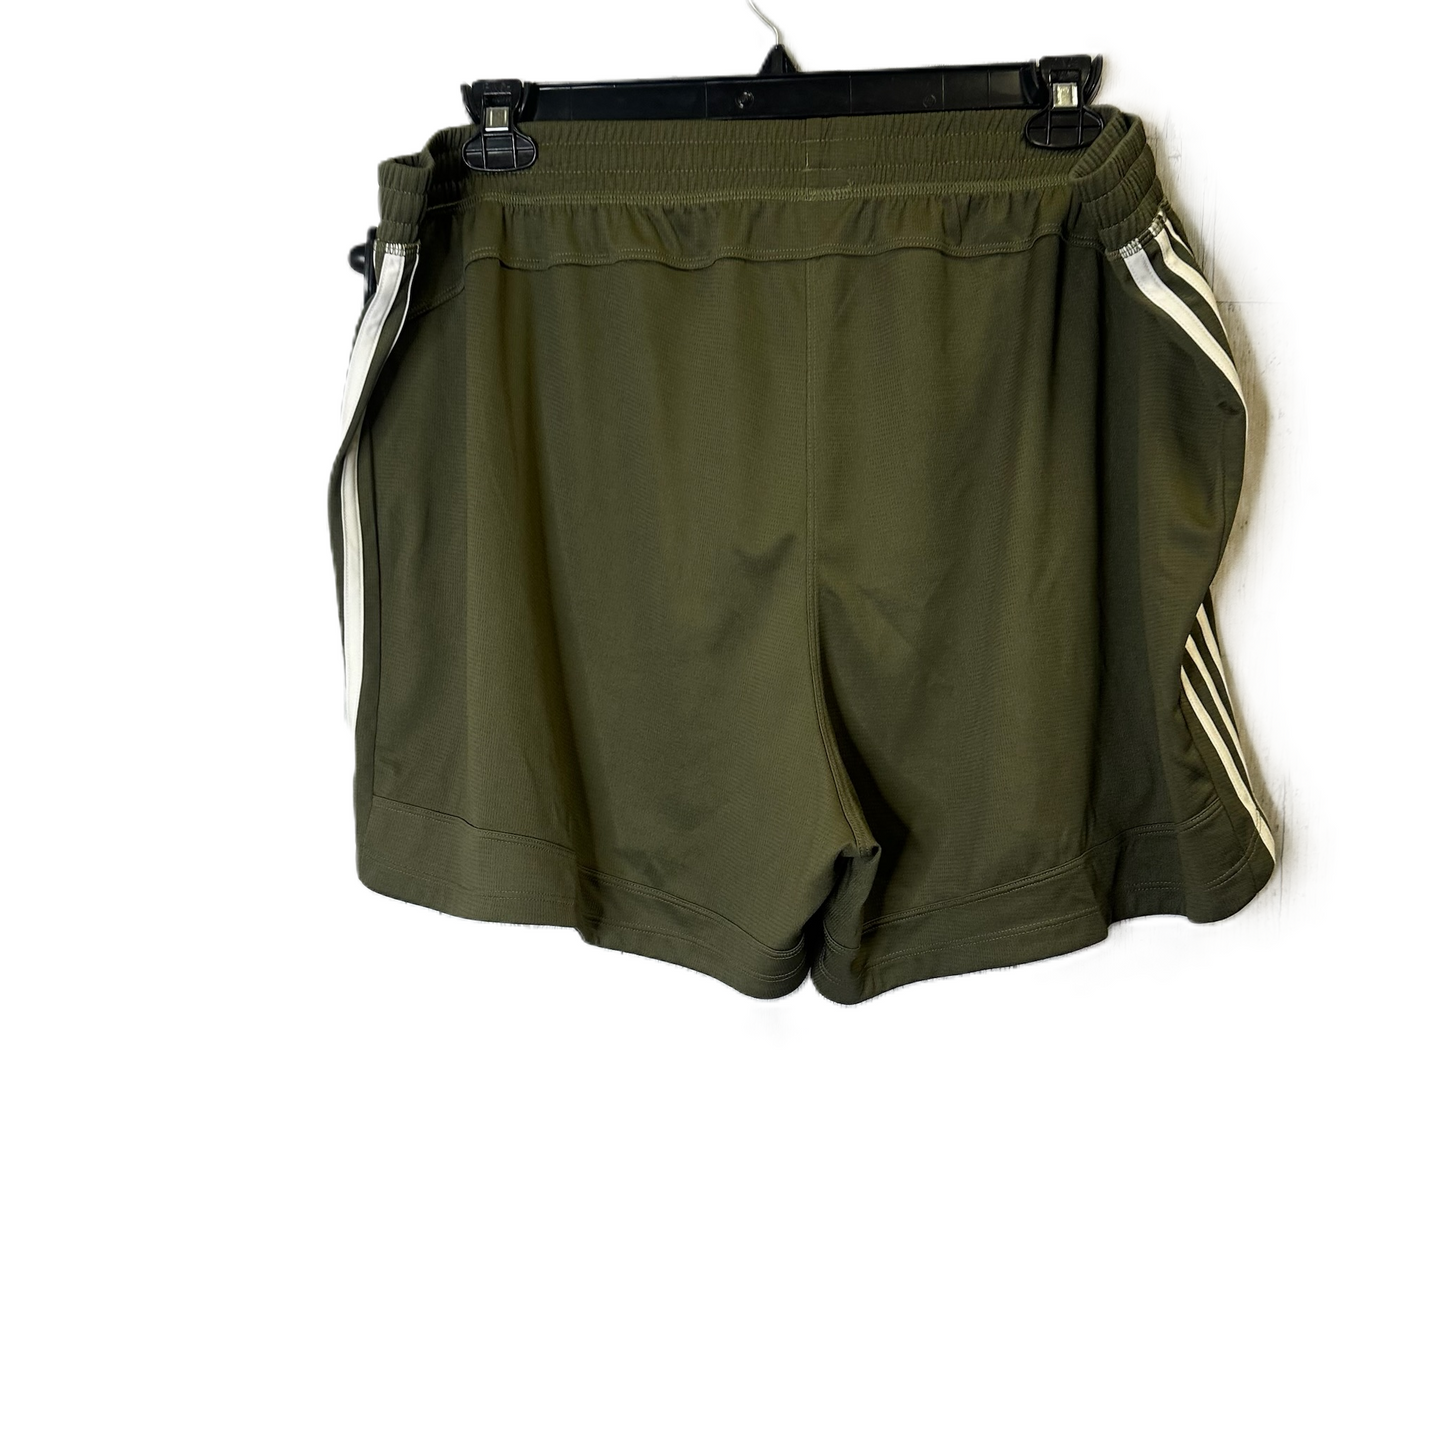 Green Athletic Shorts By Adidas, Size: 3x